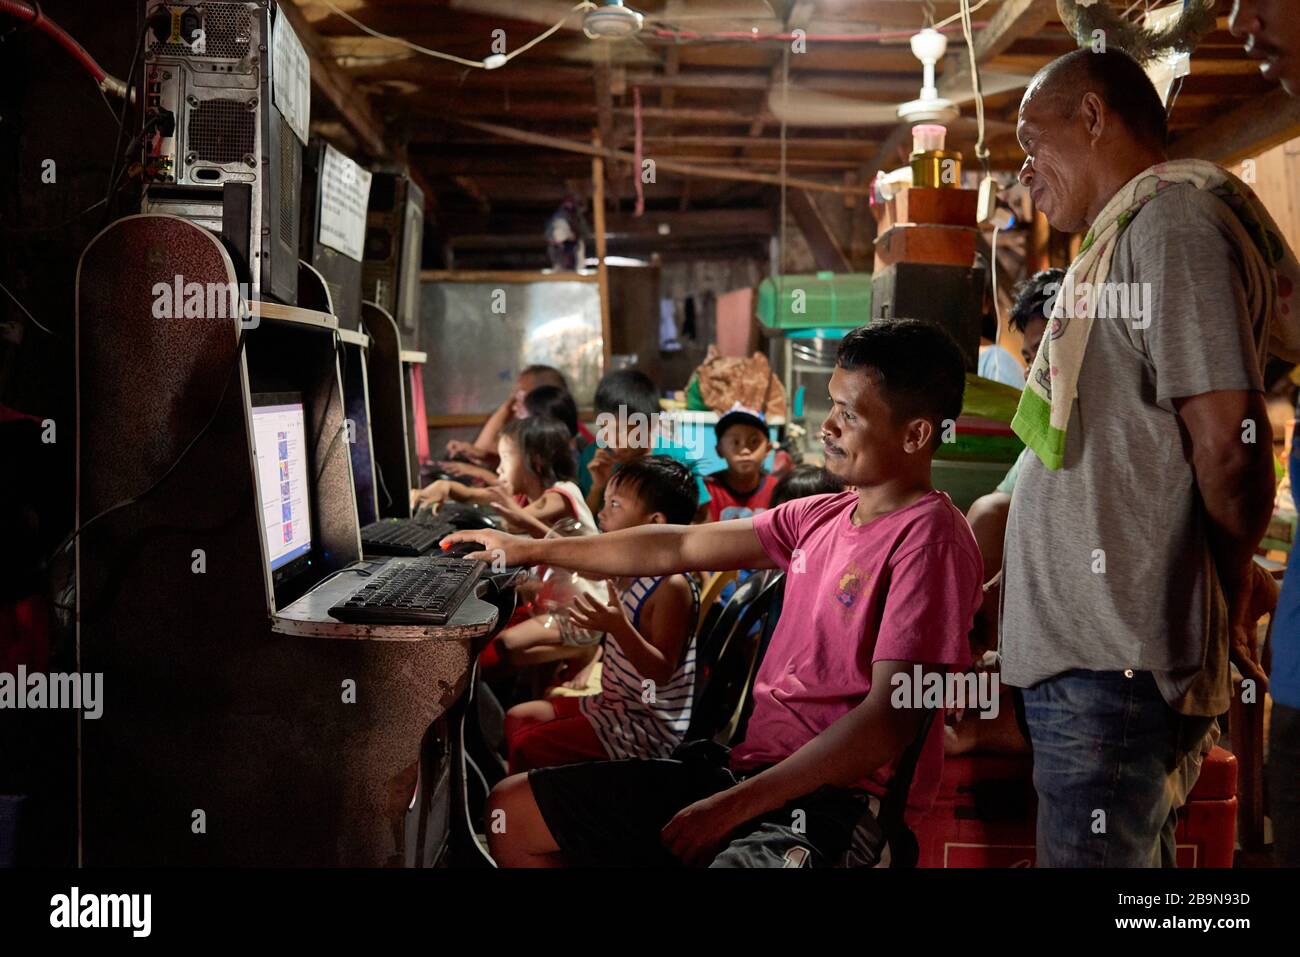 Group of people playing video games in a makeshift arcade room in the Carbon public market. Stock Photo